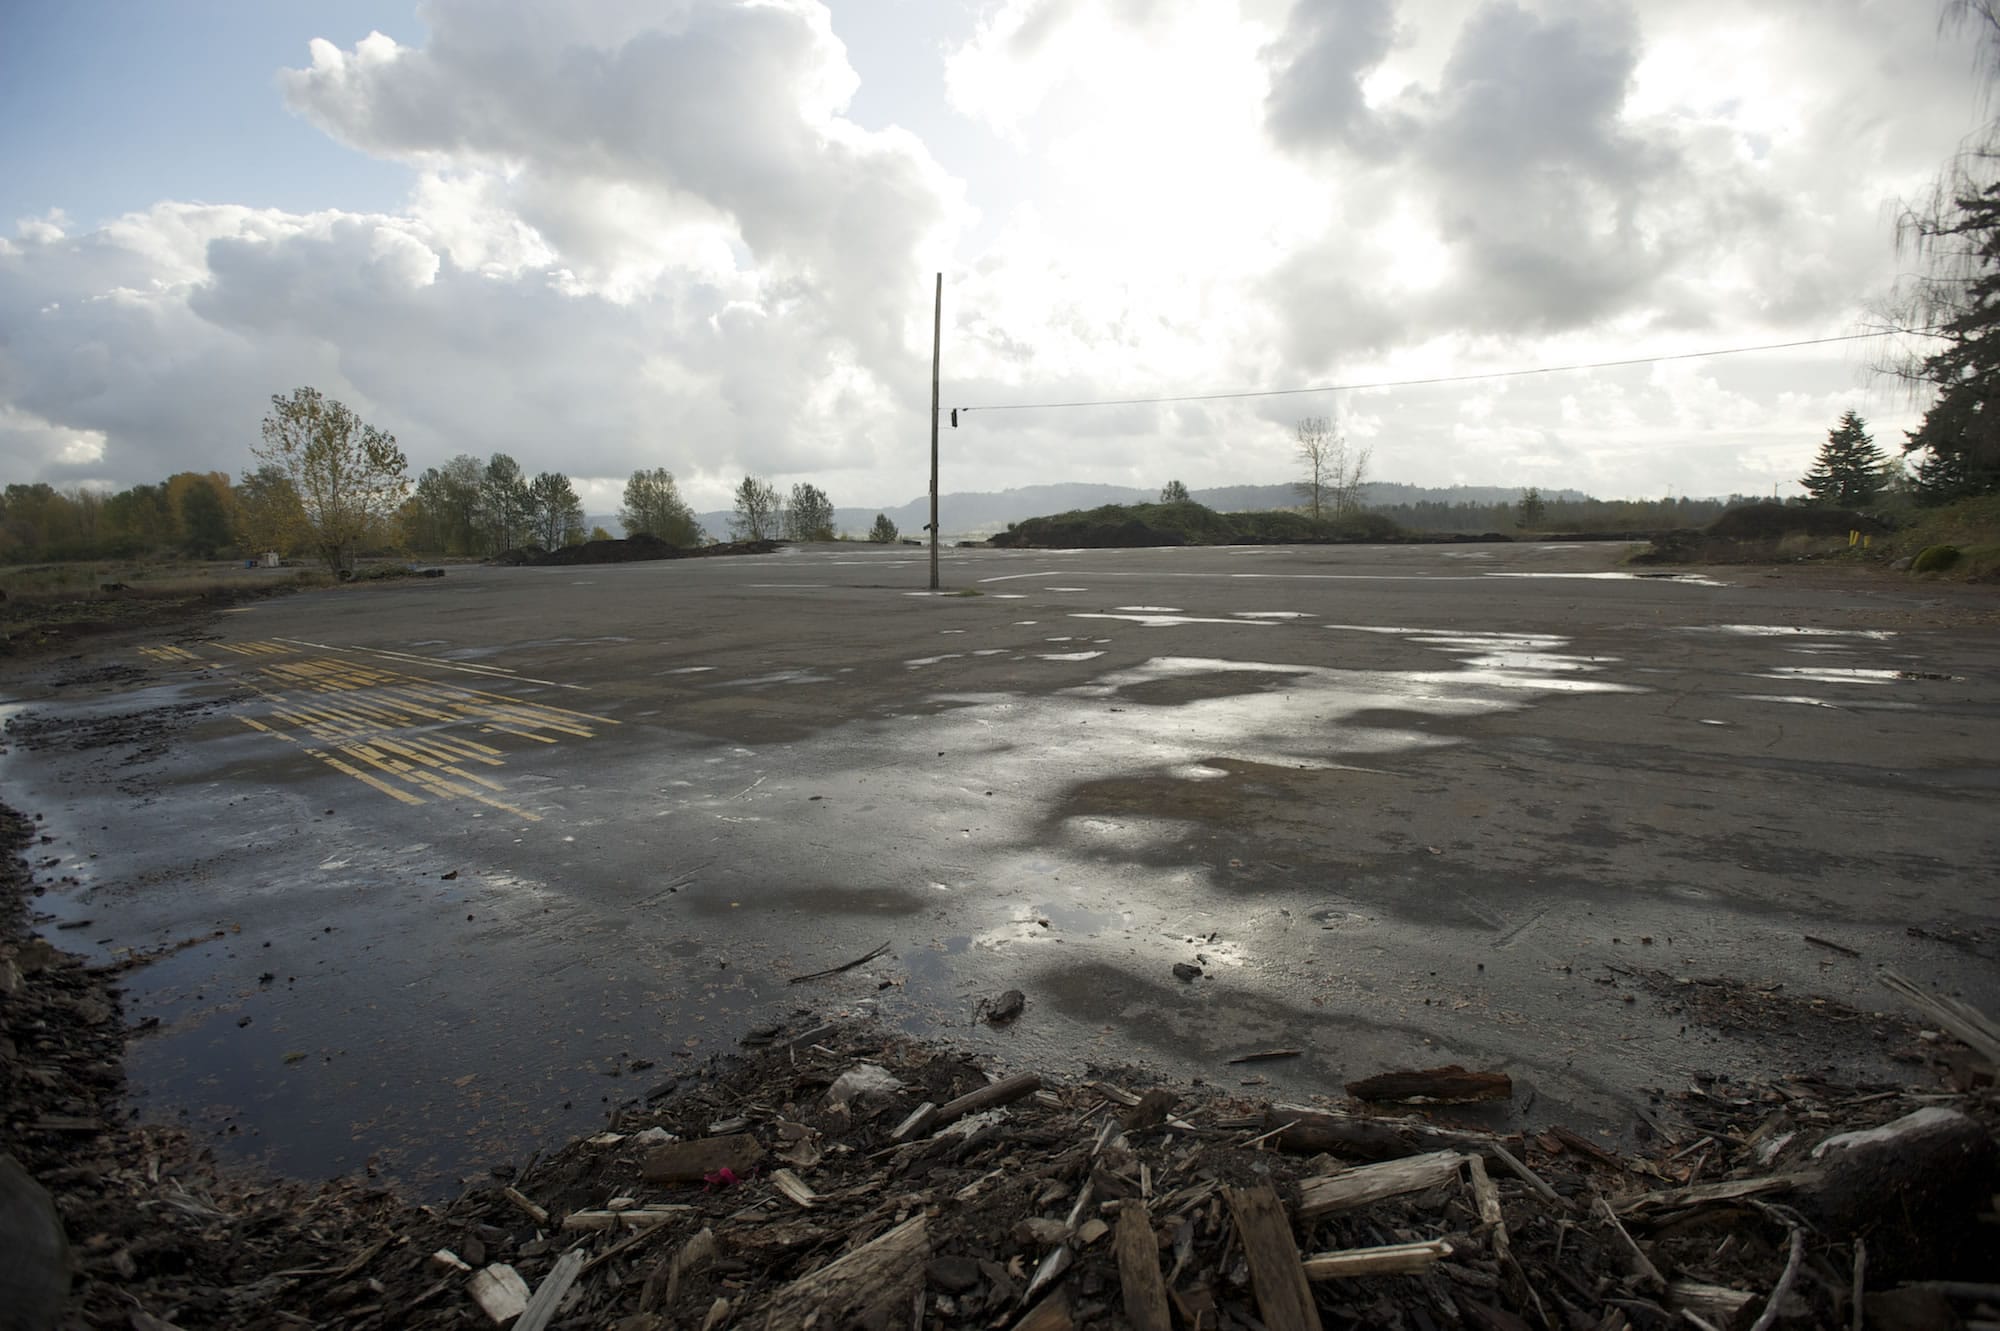 Mixed-use redevelopment plans for the former Hambleton Bros. Lumber Co. site are being reviewed by Washougal officials.